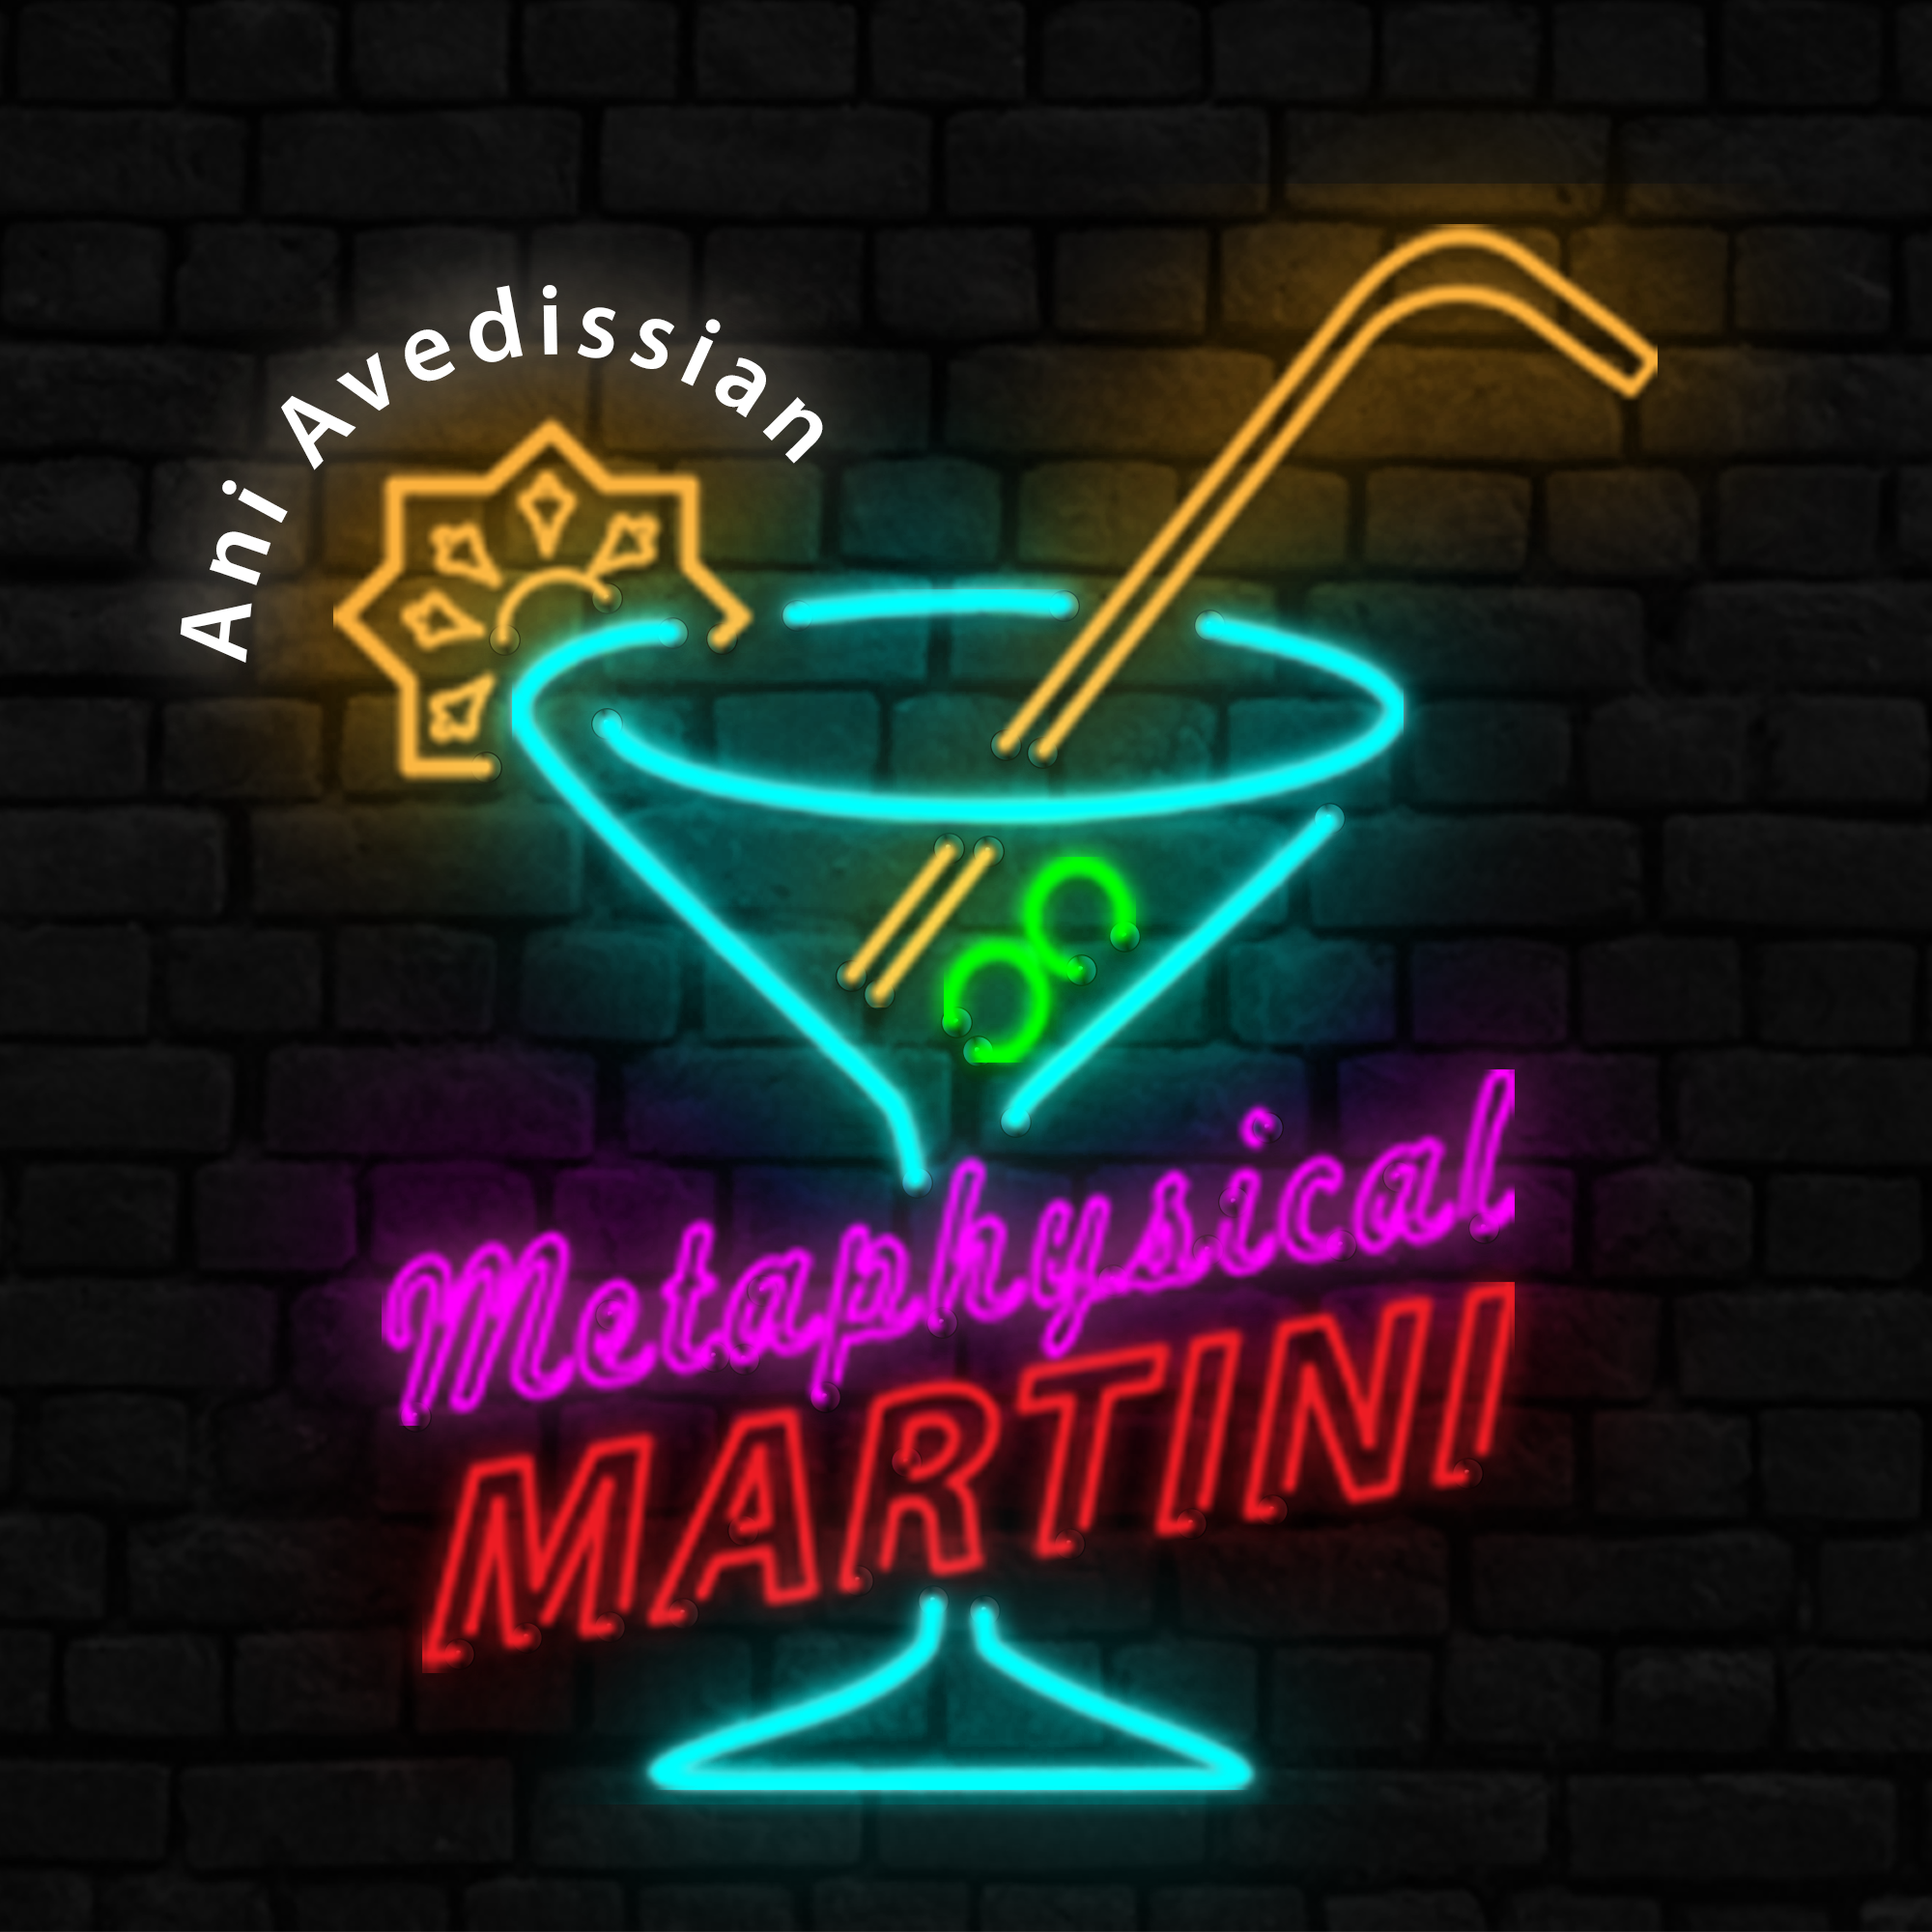 "Metaphysical Martini" 05/26/2021 - Feel like you're the last sane person on the planet?  Take heart - you're not alone!